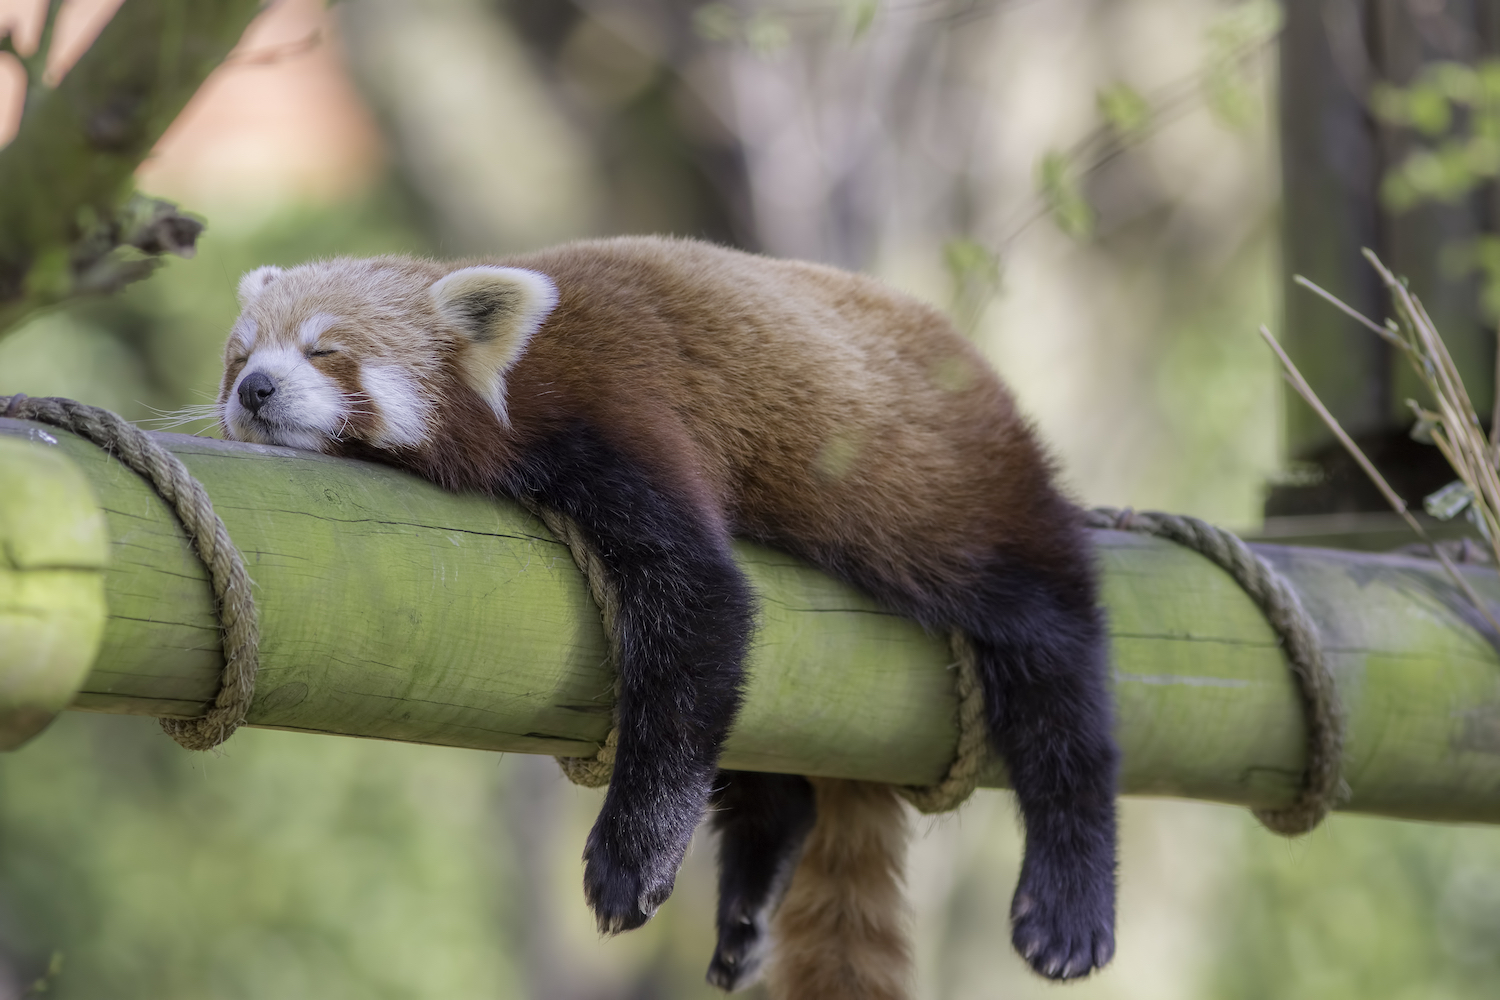 Can any animal survive without sleep?